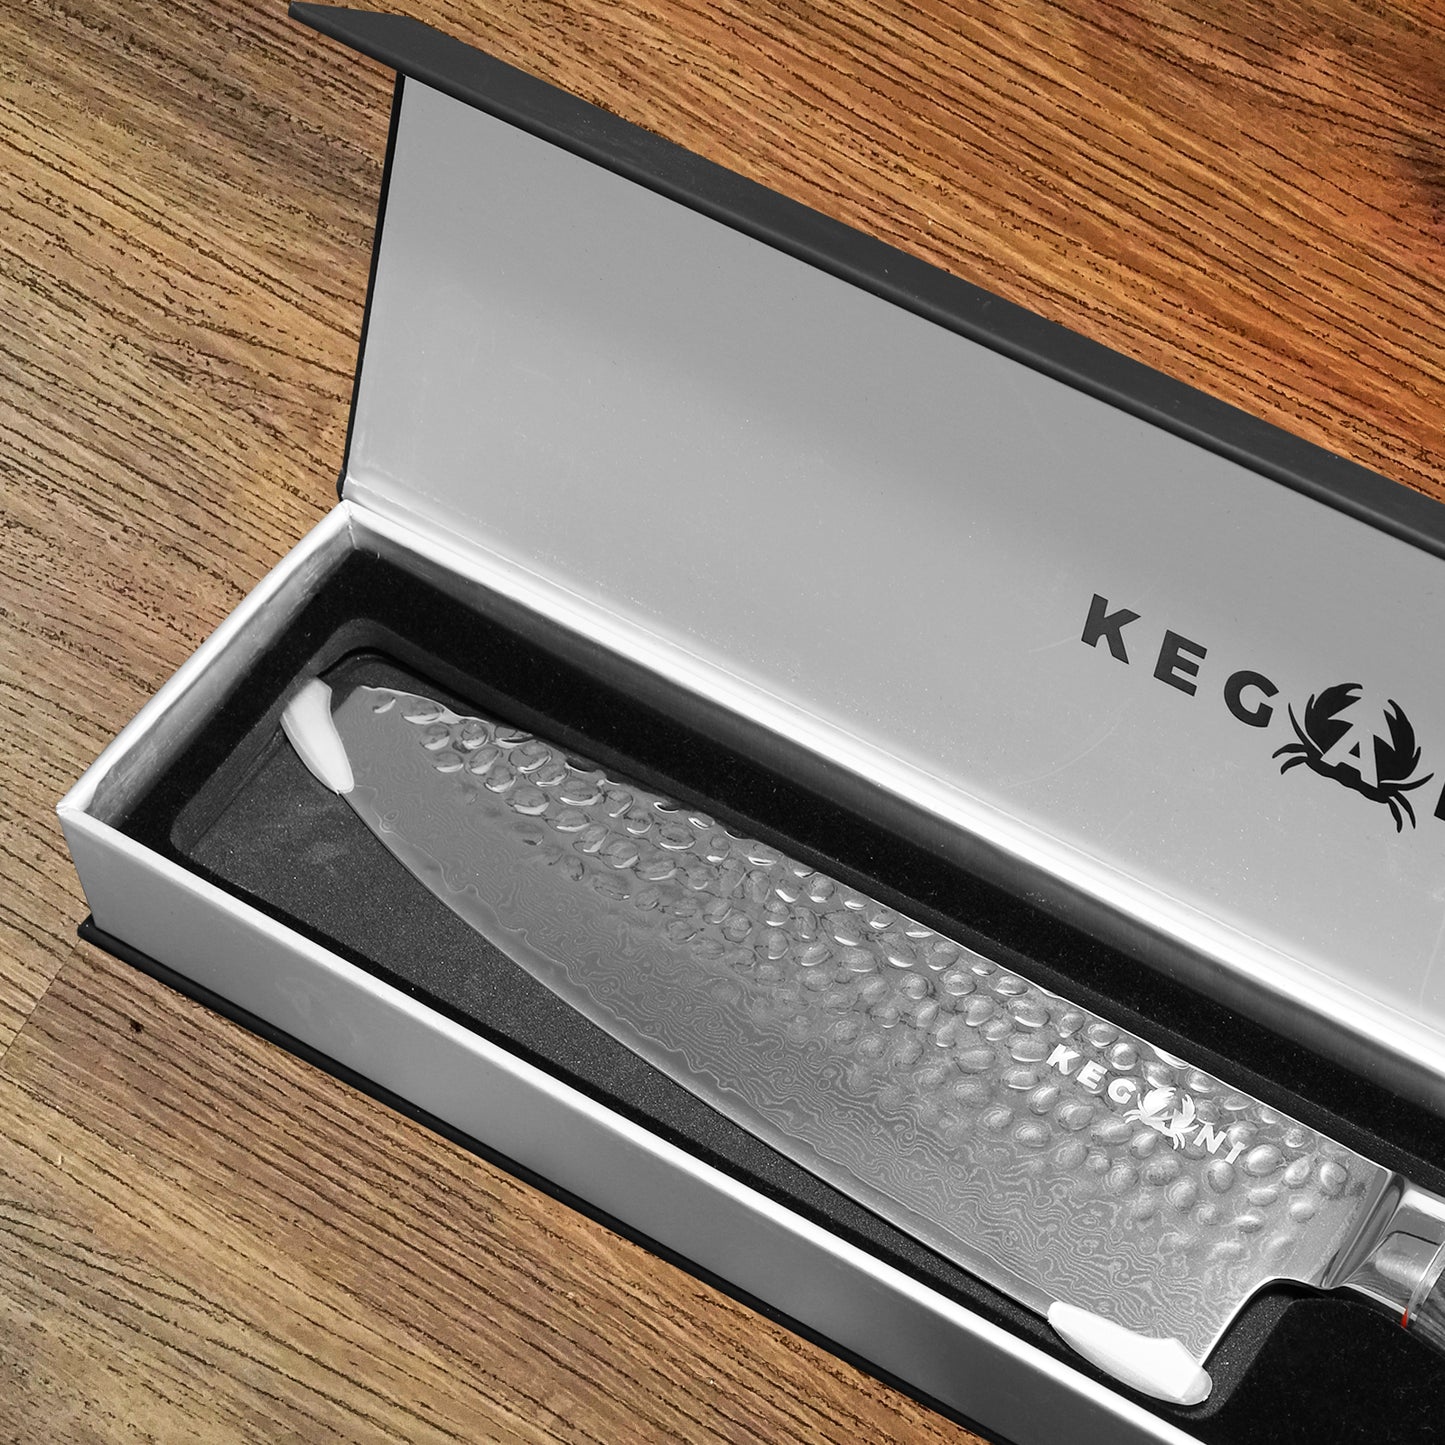 Kegani 8 Inch Damascus Chef Knife 67 Layers 10Cr15CoMoV Japanese Knife Hammered Texture Damascus Knife - FullTang Wood Handle Chefs Knife With Gift Box&Sheath